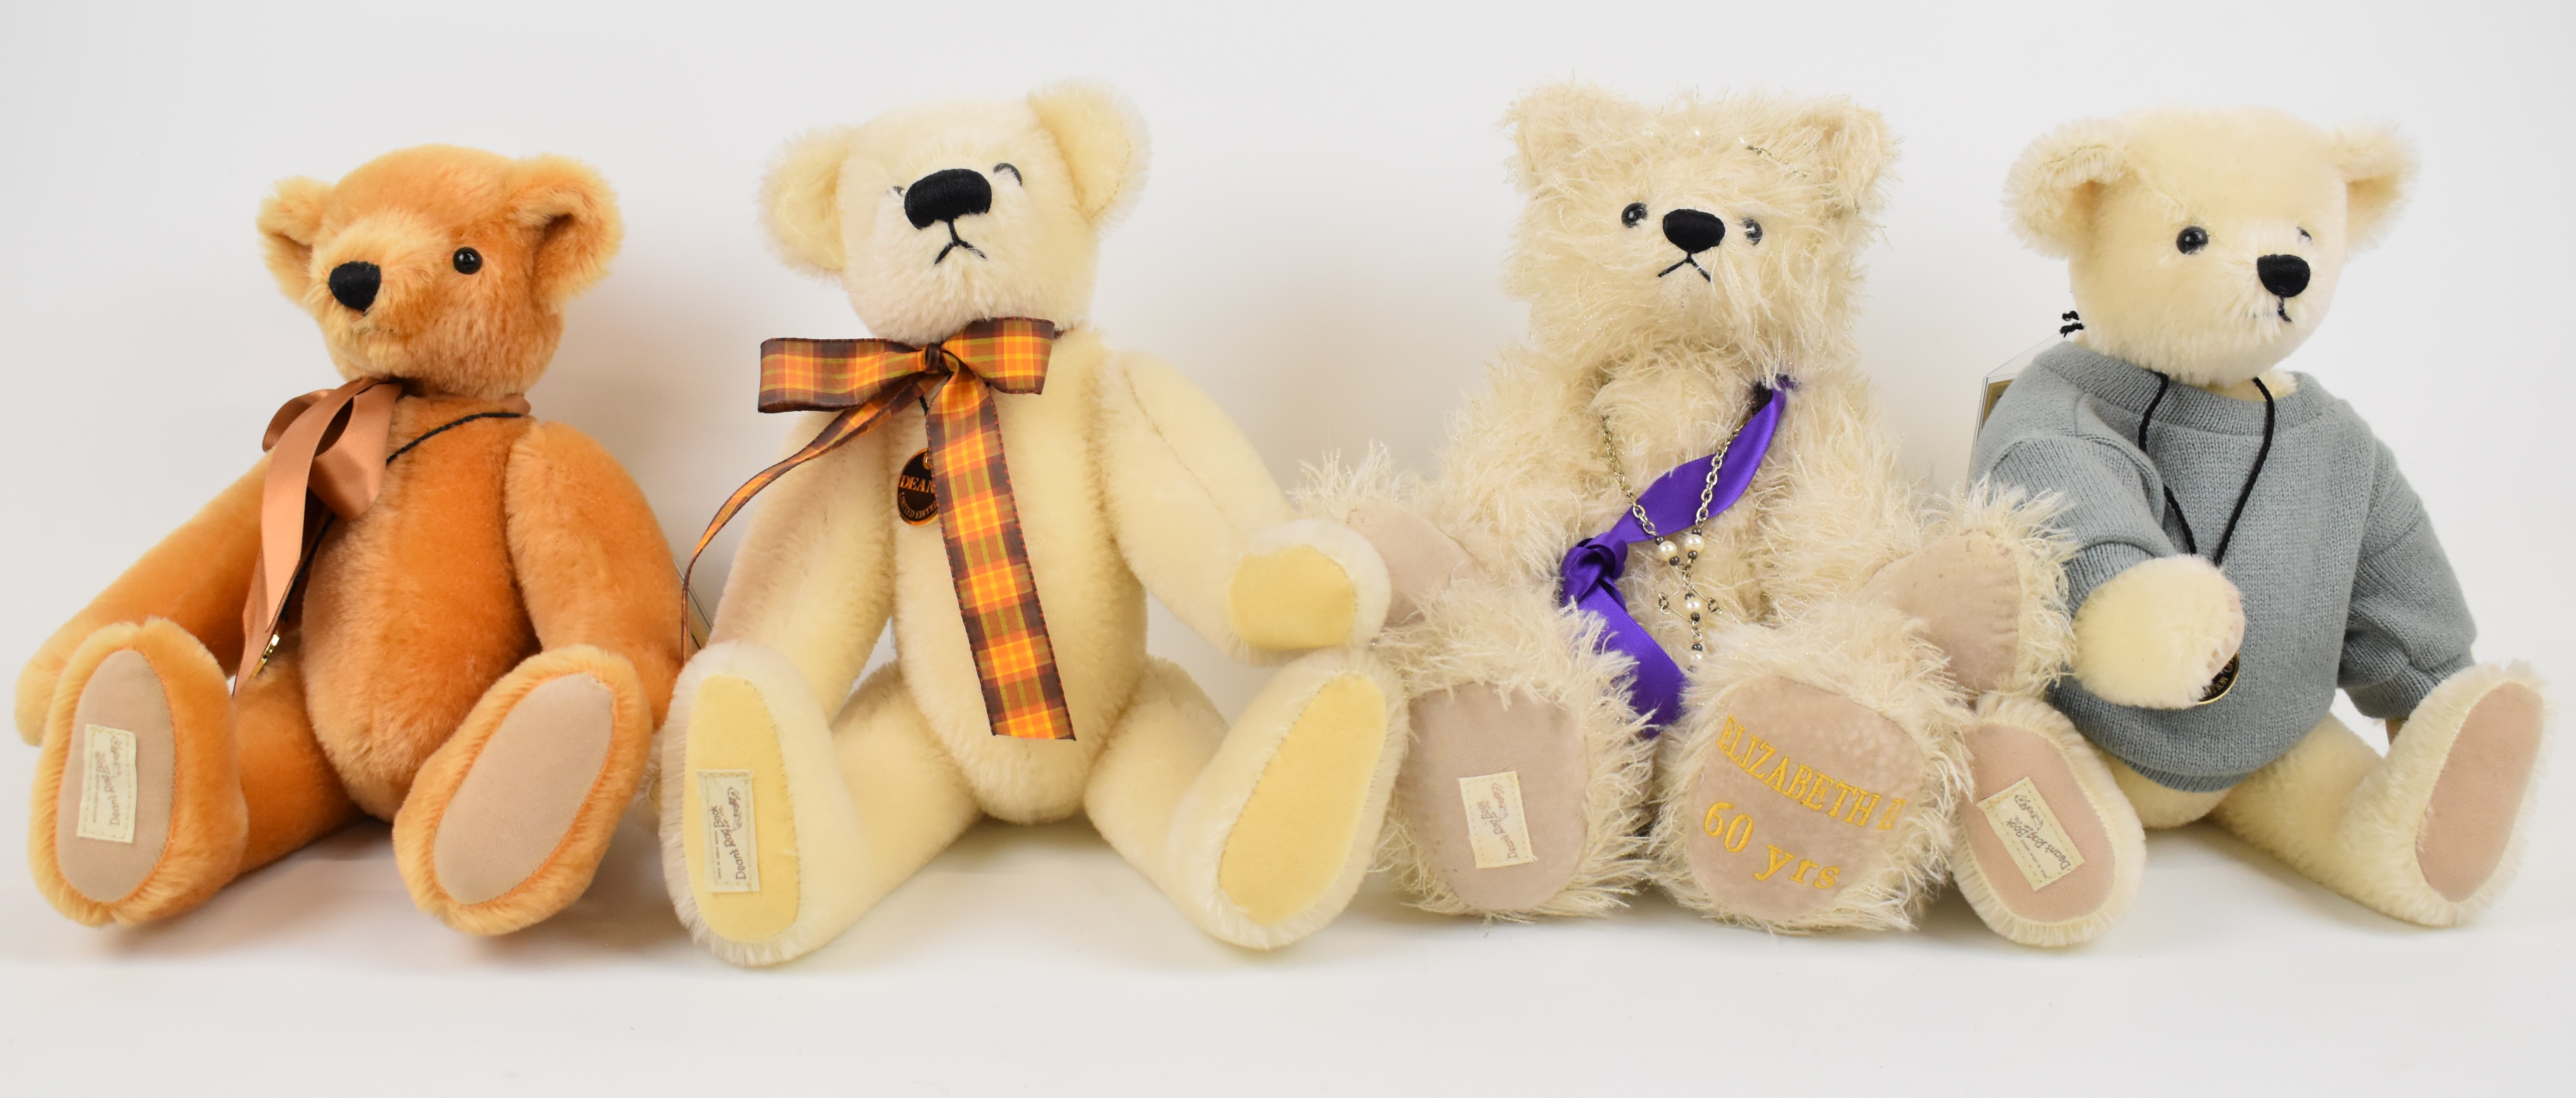 Thirteen Deans Rag Book limited edition Teddy bears, most with original tags and labels to include - Bild 5 aus 12